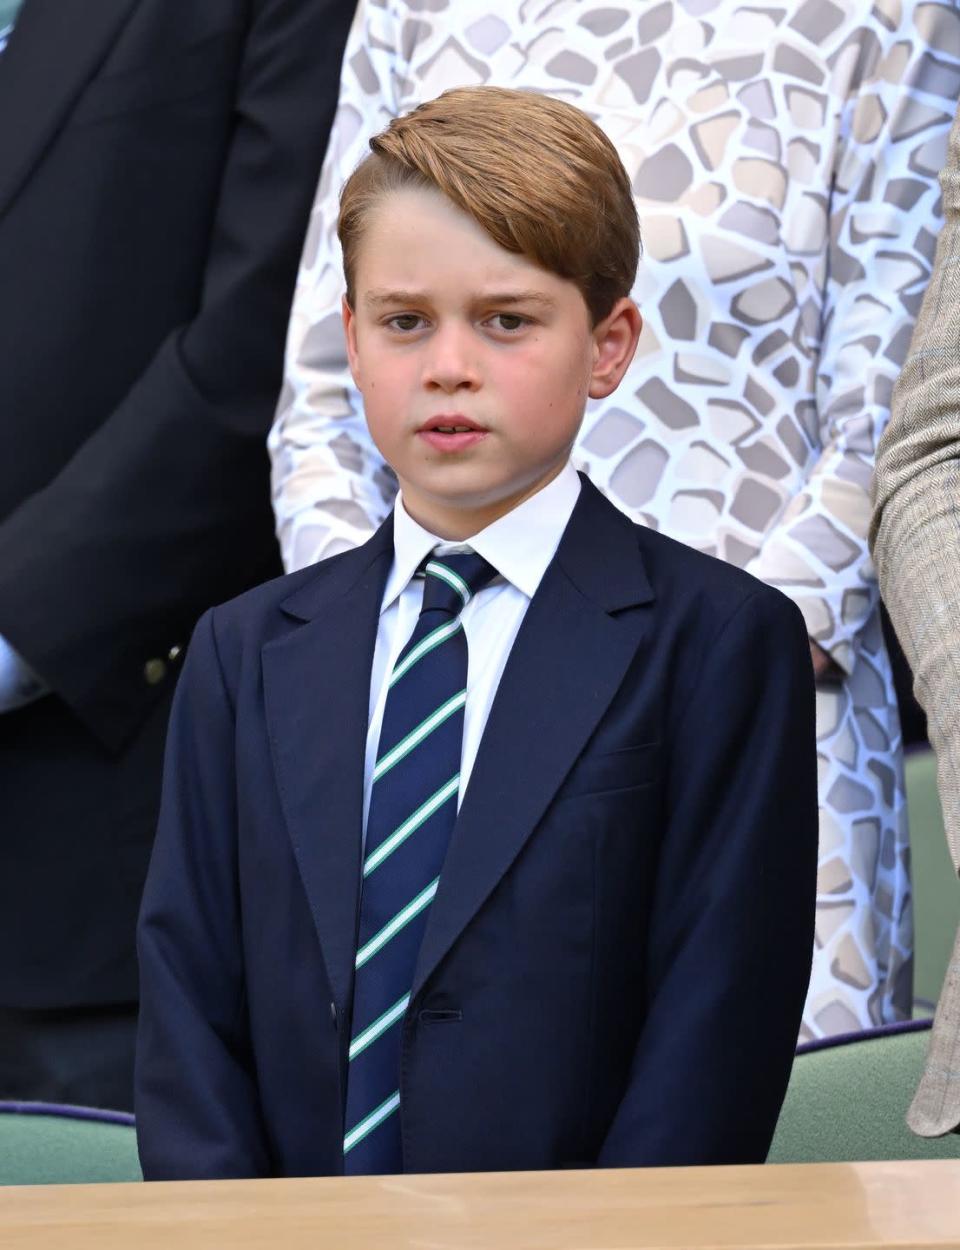 <p><strong>Branch of the Family Tree:</strong> Son of Prince William; grandson of King Charles; great-grandson of Queen Elizabeth II</p><p><strong>More:</strong> <a href="https://www.townandcountrymag.com/society/tradition/g10044961/prince-george-photos-news/" rel="nofollow noopener" target="_blank" data-ylk="slk:The Cutest Photos of Prince George" class="link ">The Cutest Photos of Prince George</a></p>